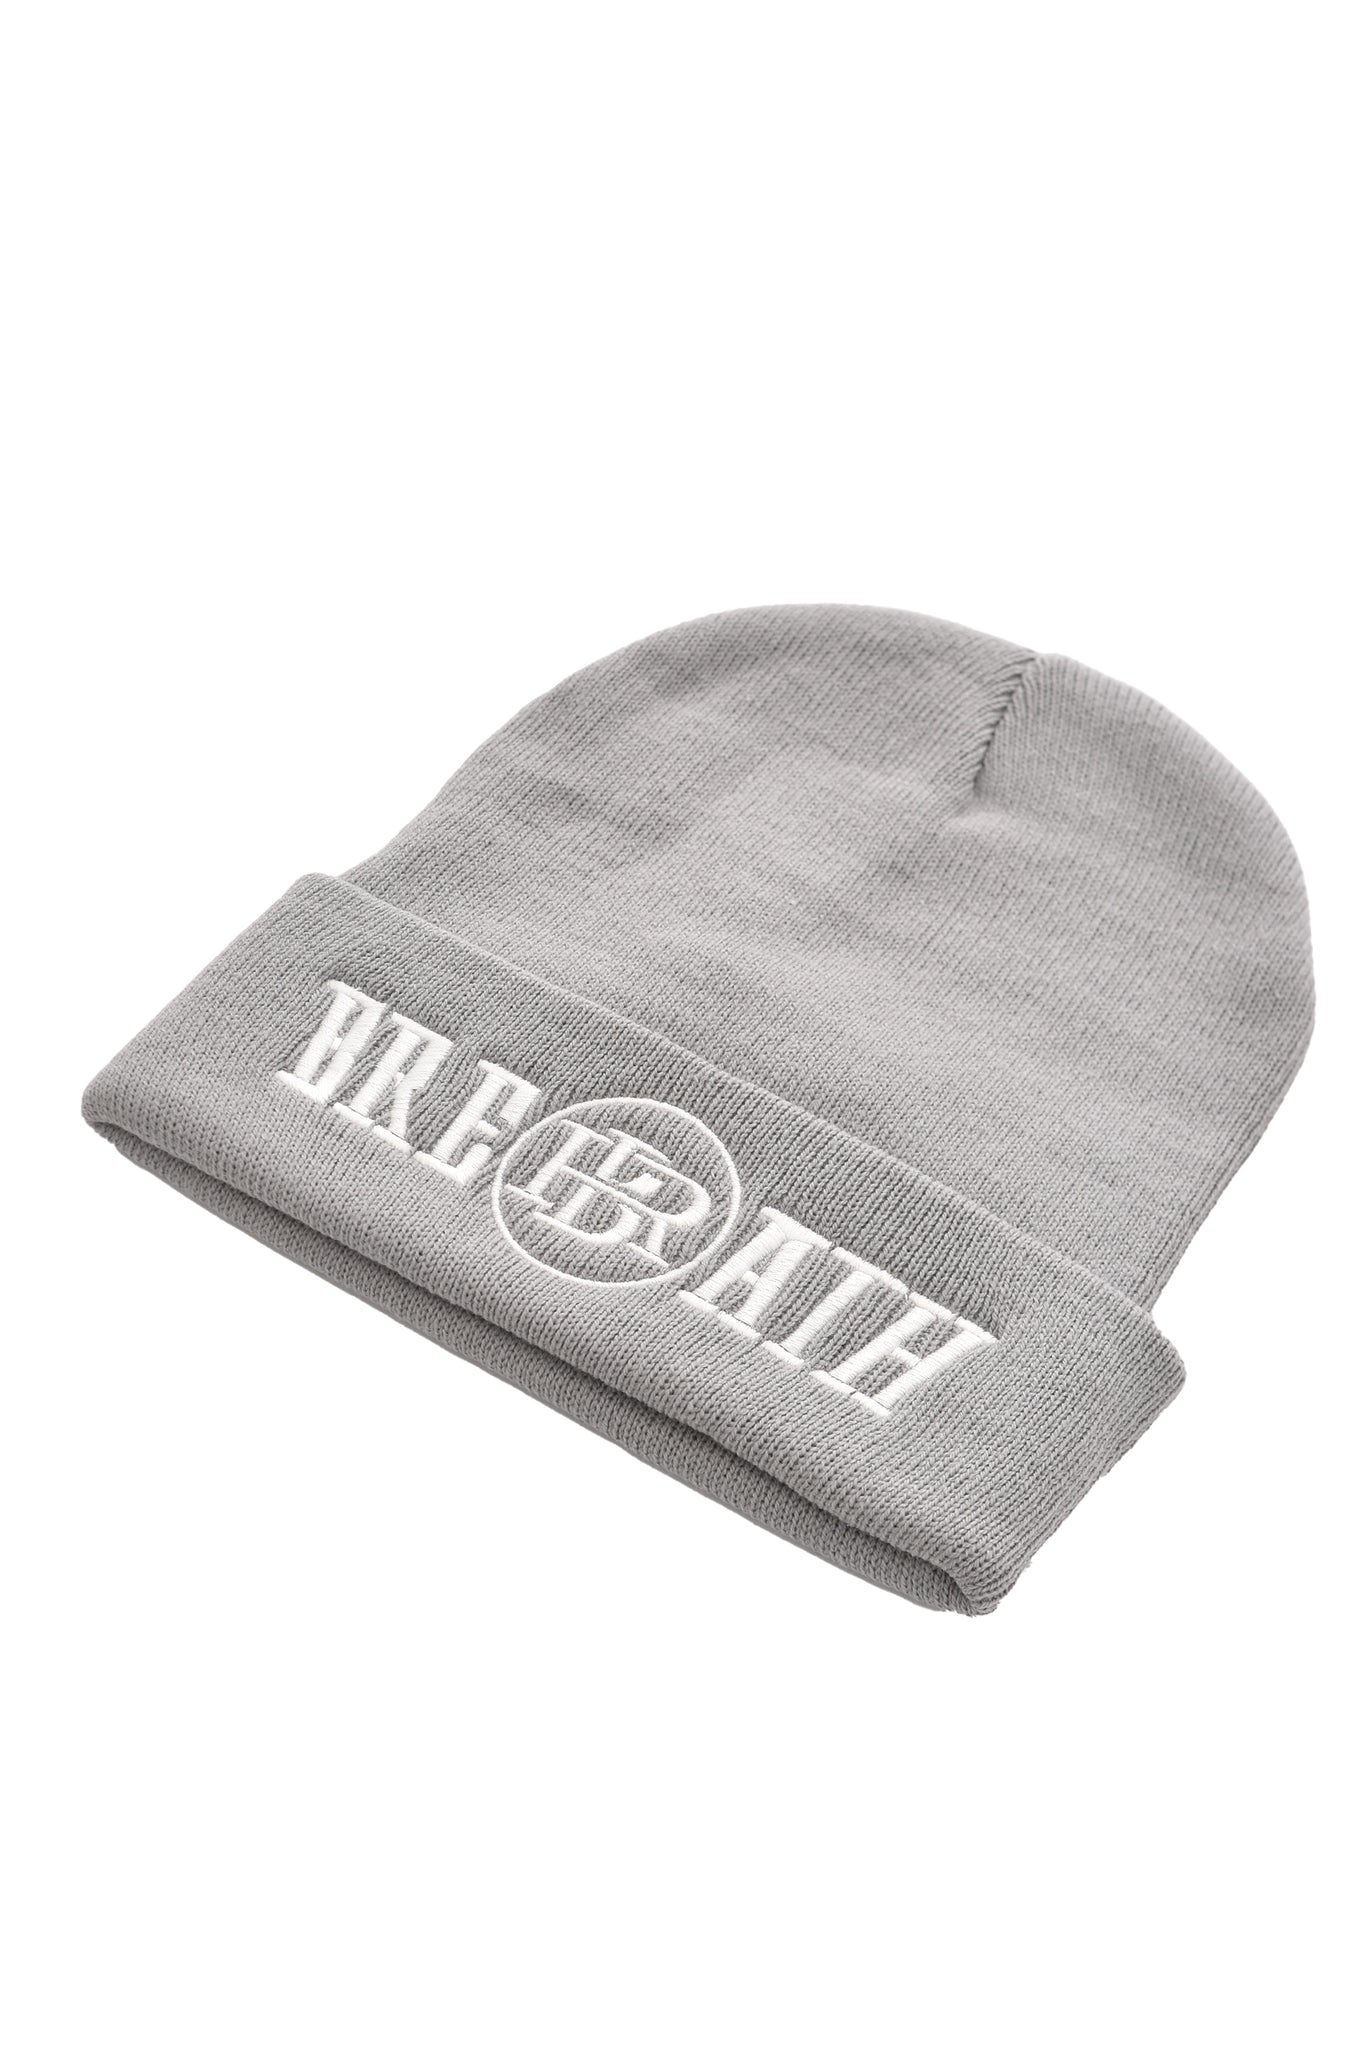 EMBROIDERY KNIT CAP / GREY